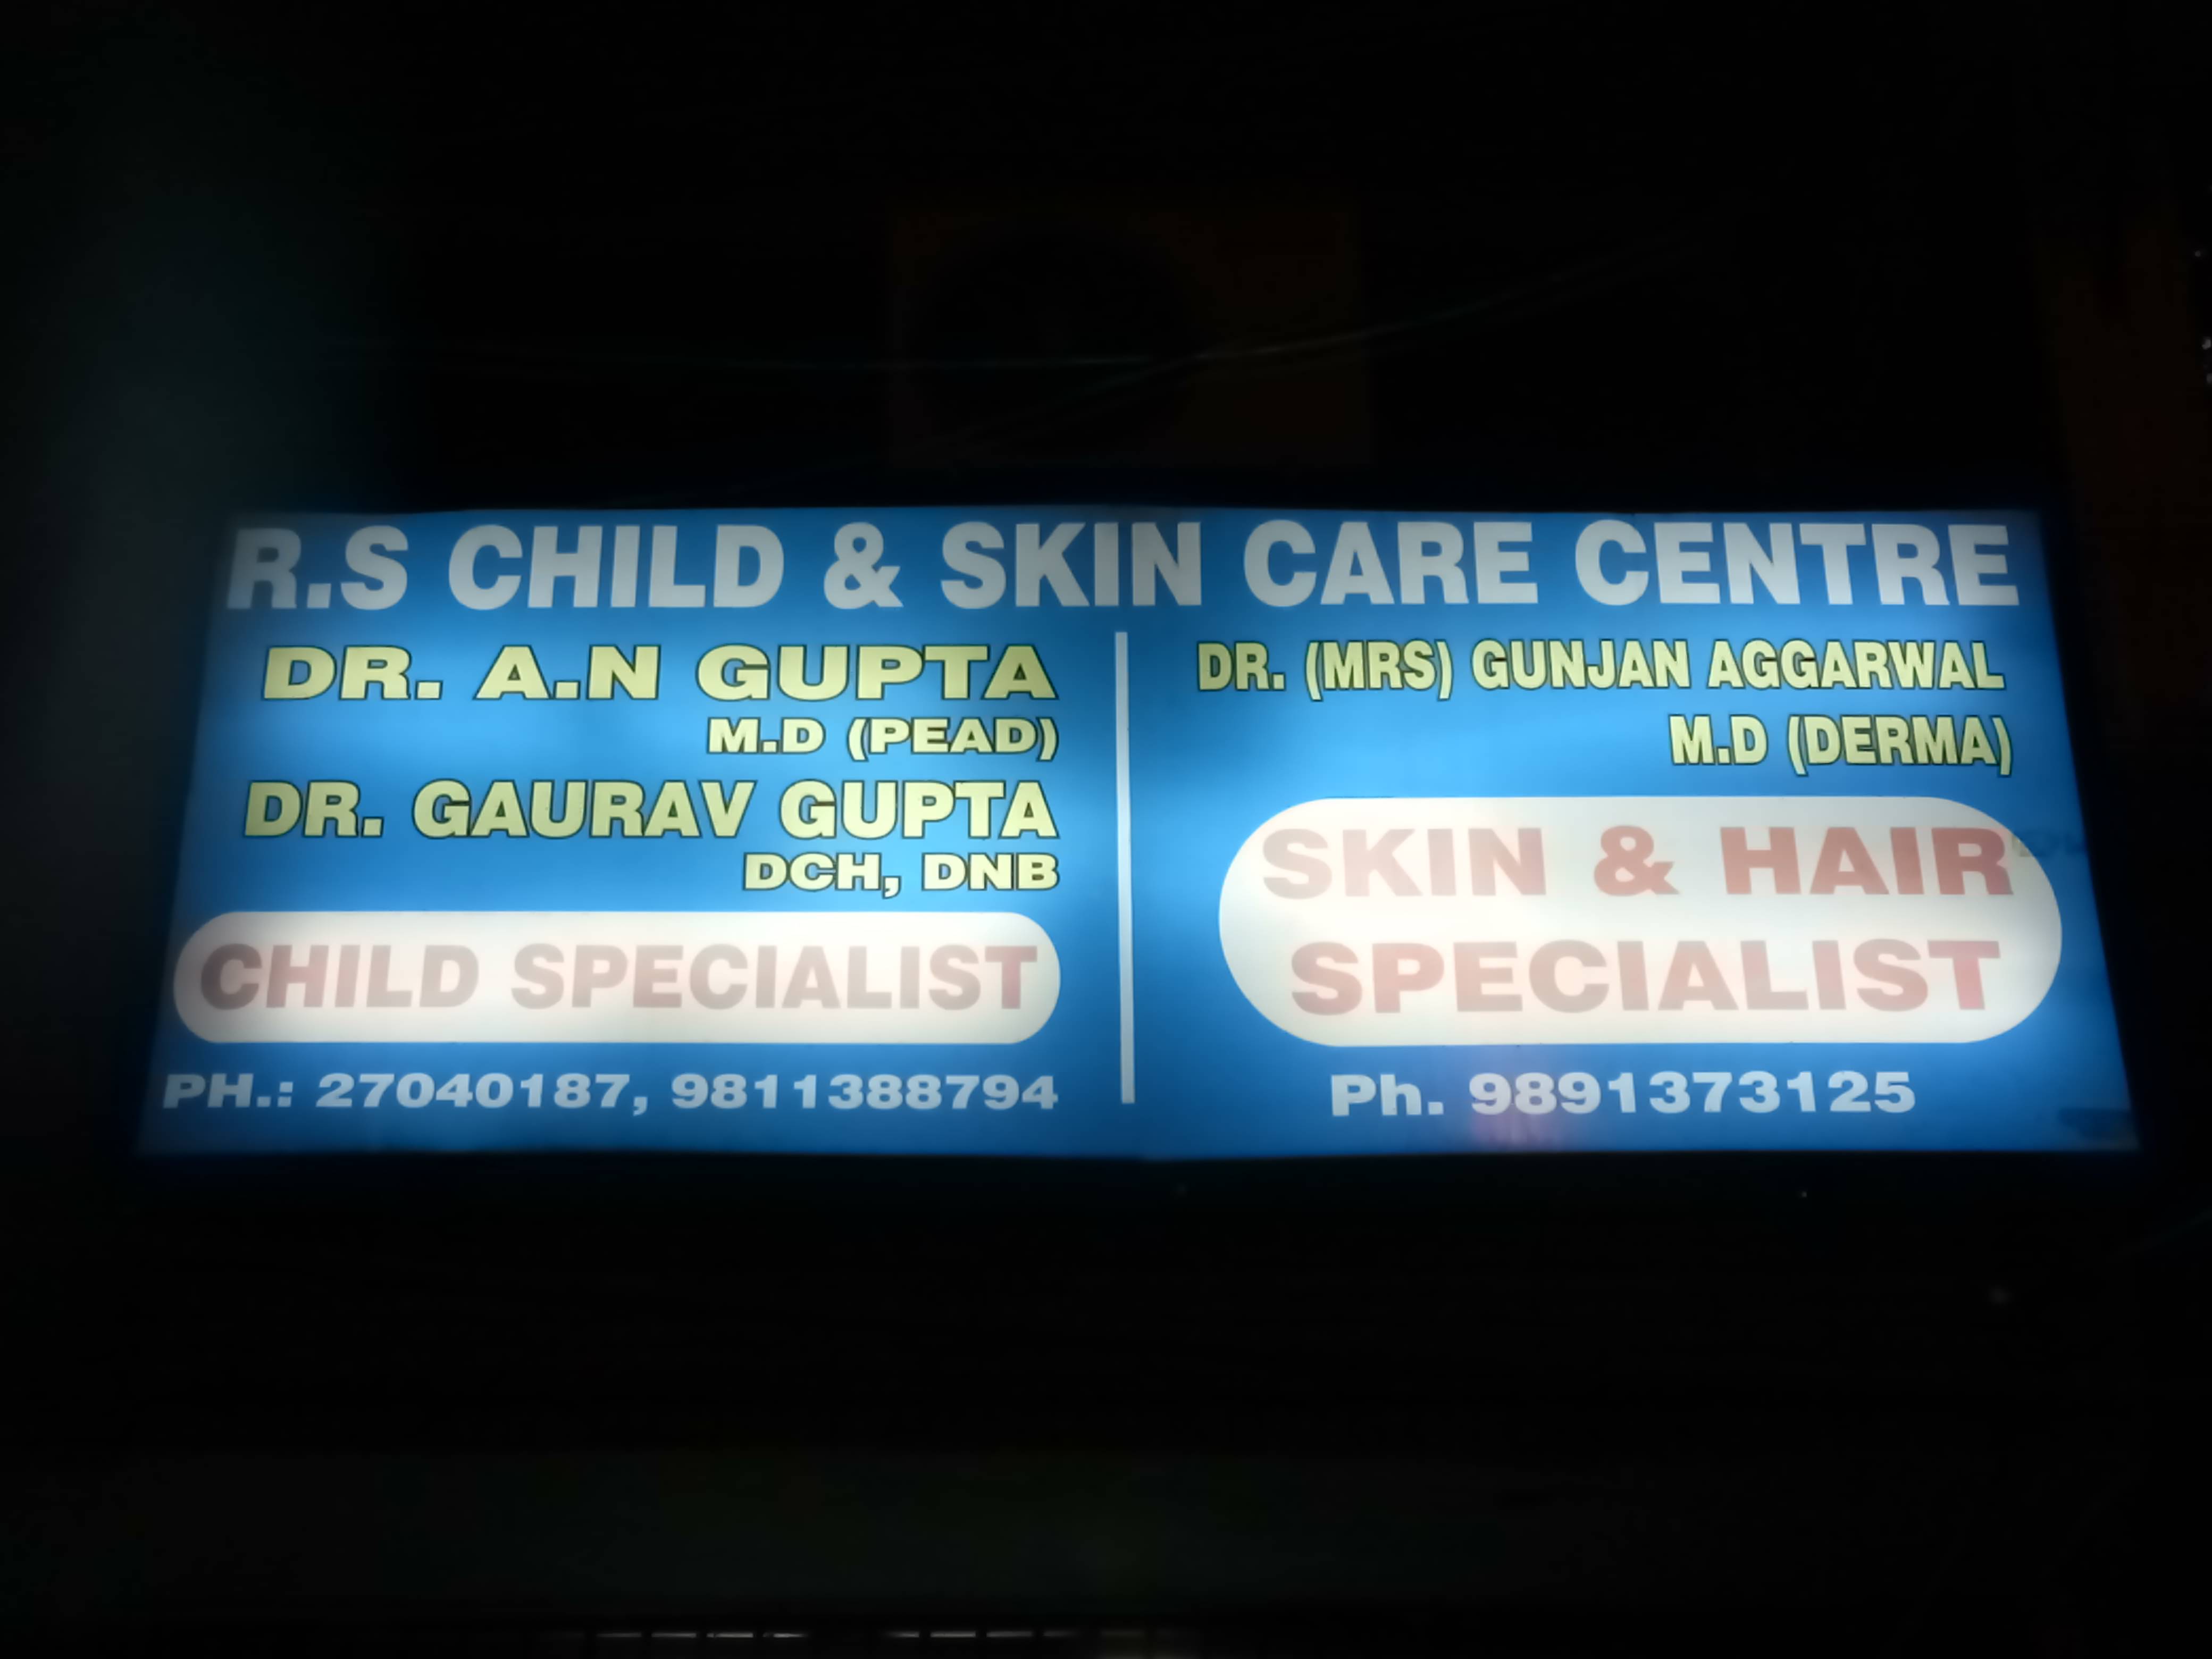  Child and Skin Care Centre in Rohini, Delhi - Book Appointment, View  Contact Number, Feedbacks, Address | Dr. Gunjan Agarwal